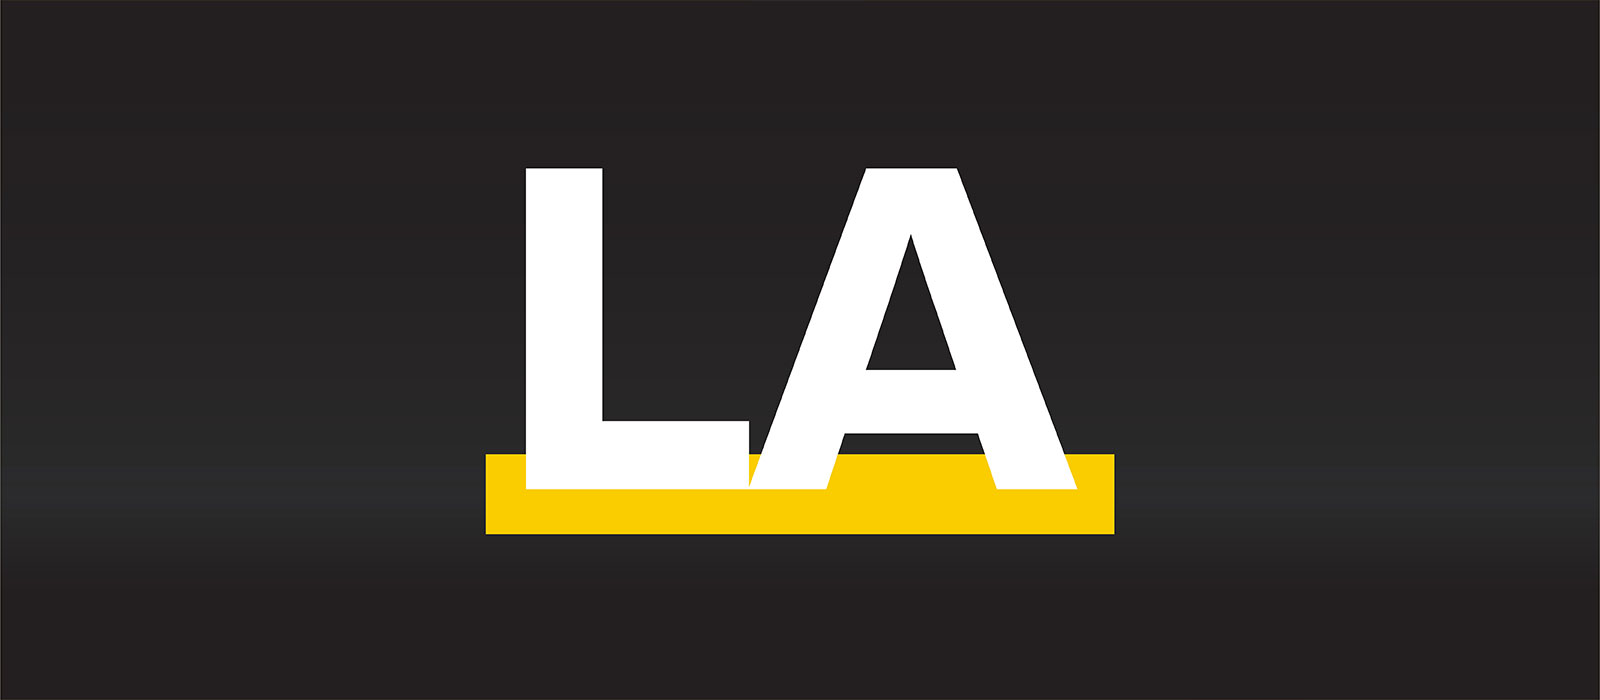 LA in ChangeUp's font and styling